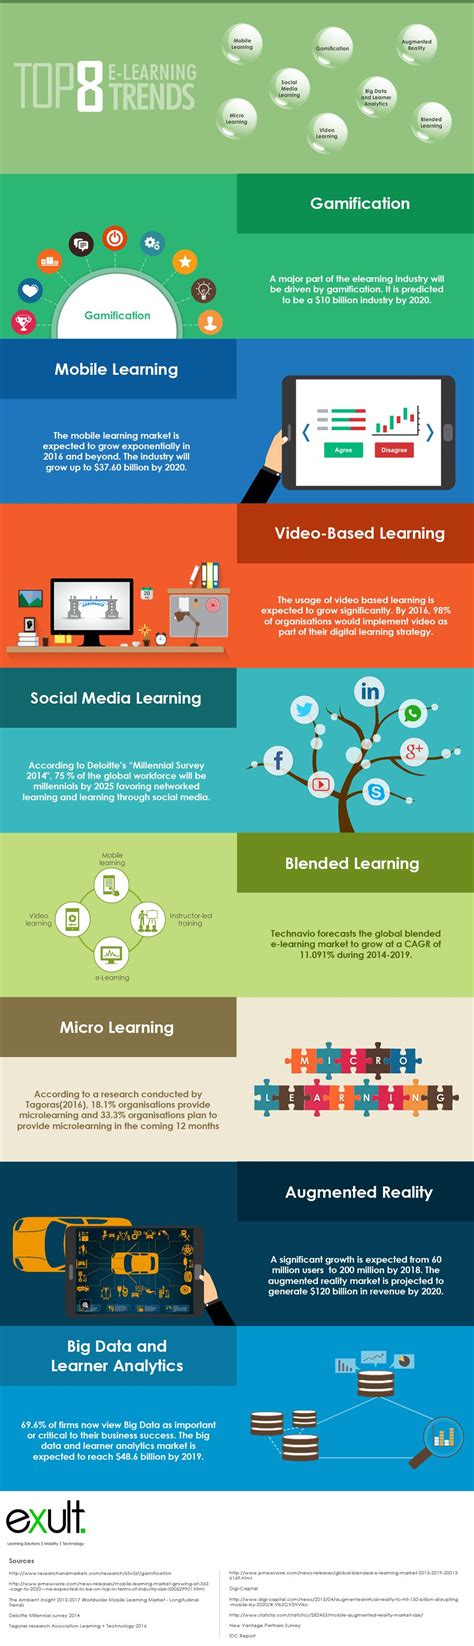 Top ELearning Trends Infographic Elearninginfographics Com Top Elearning Trends